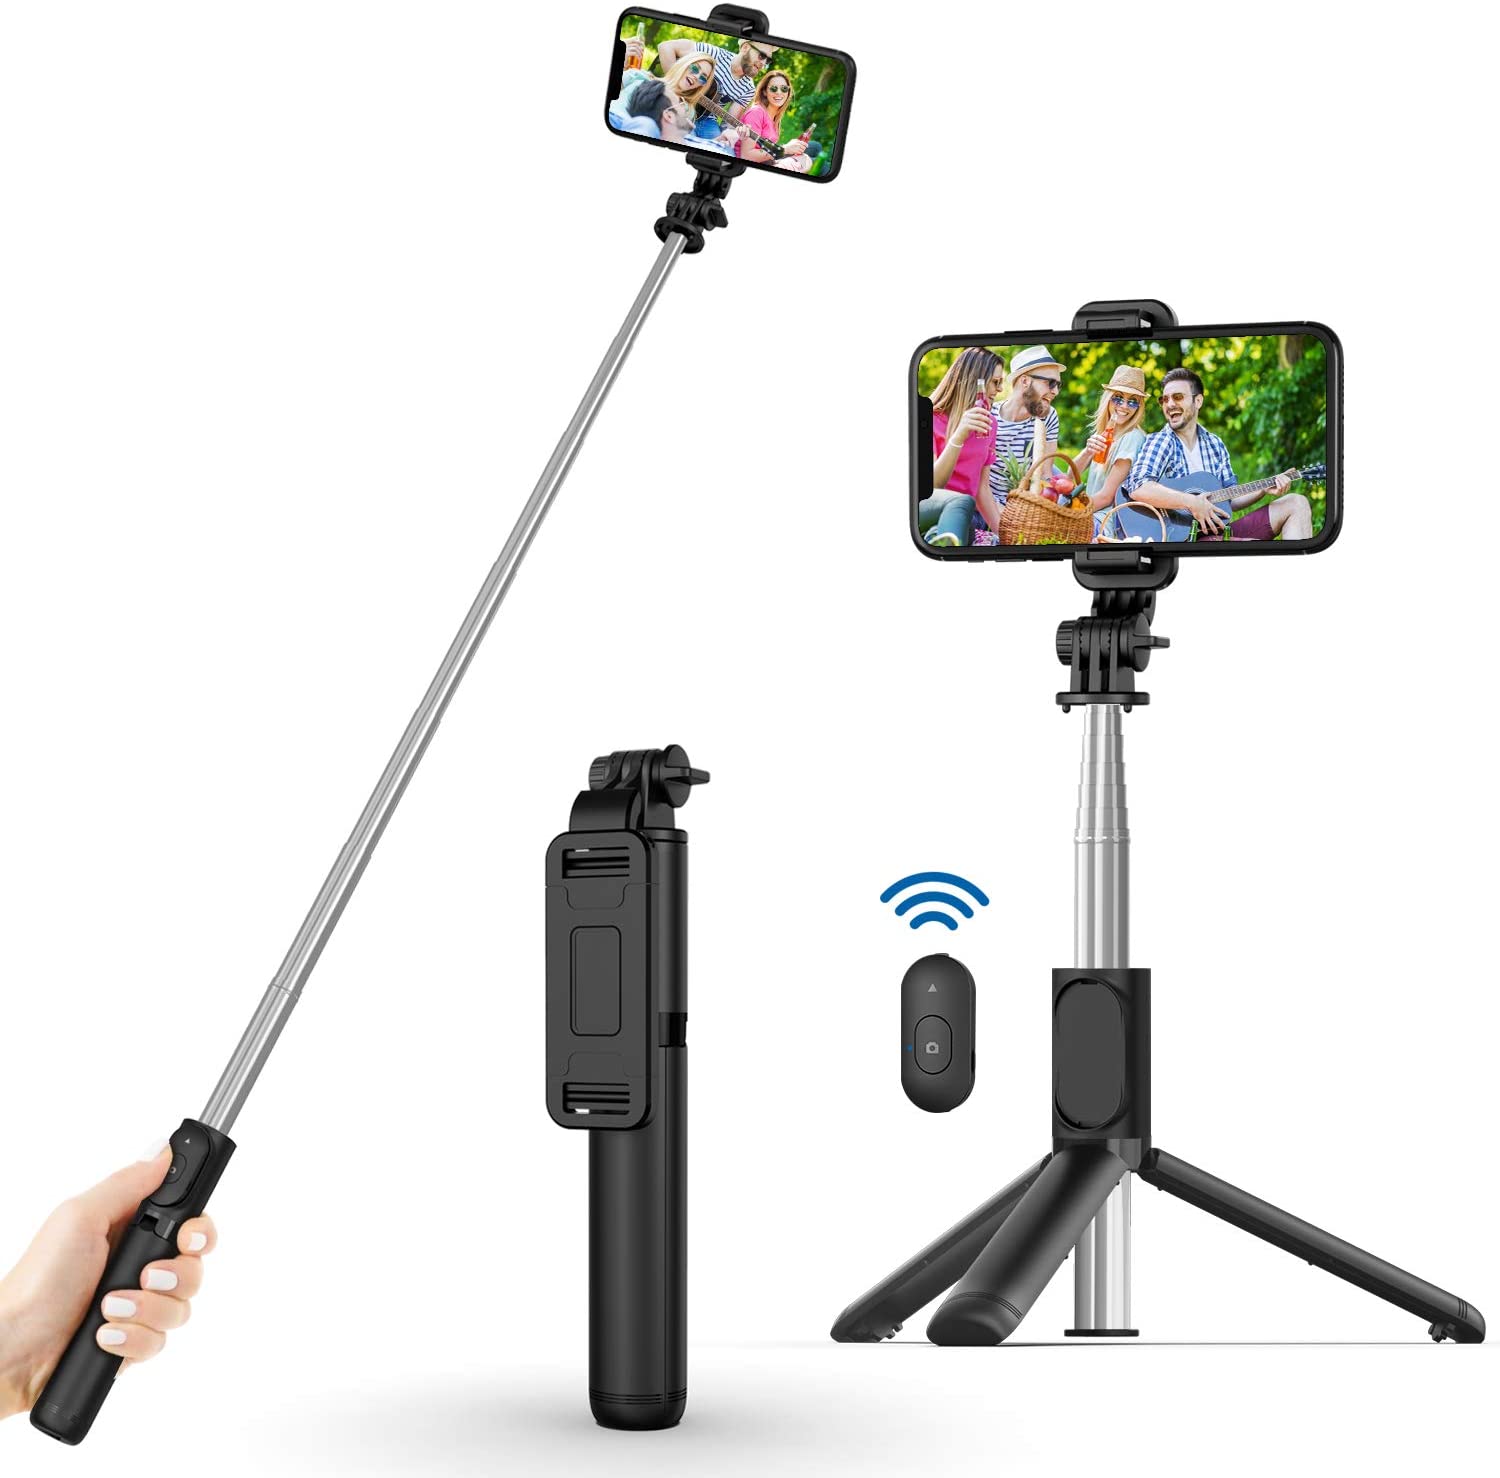 Selfie Stick, Extendable Selfie Stick with Wireless Remote and Tripod Stand, Portable, Lightweight, Compatible with iPhone 13/13 Pro/12/11/11 Pro/XS Max/XS/XR/X/8/7/Android Samsung Smartphone,More